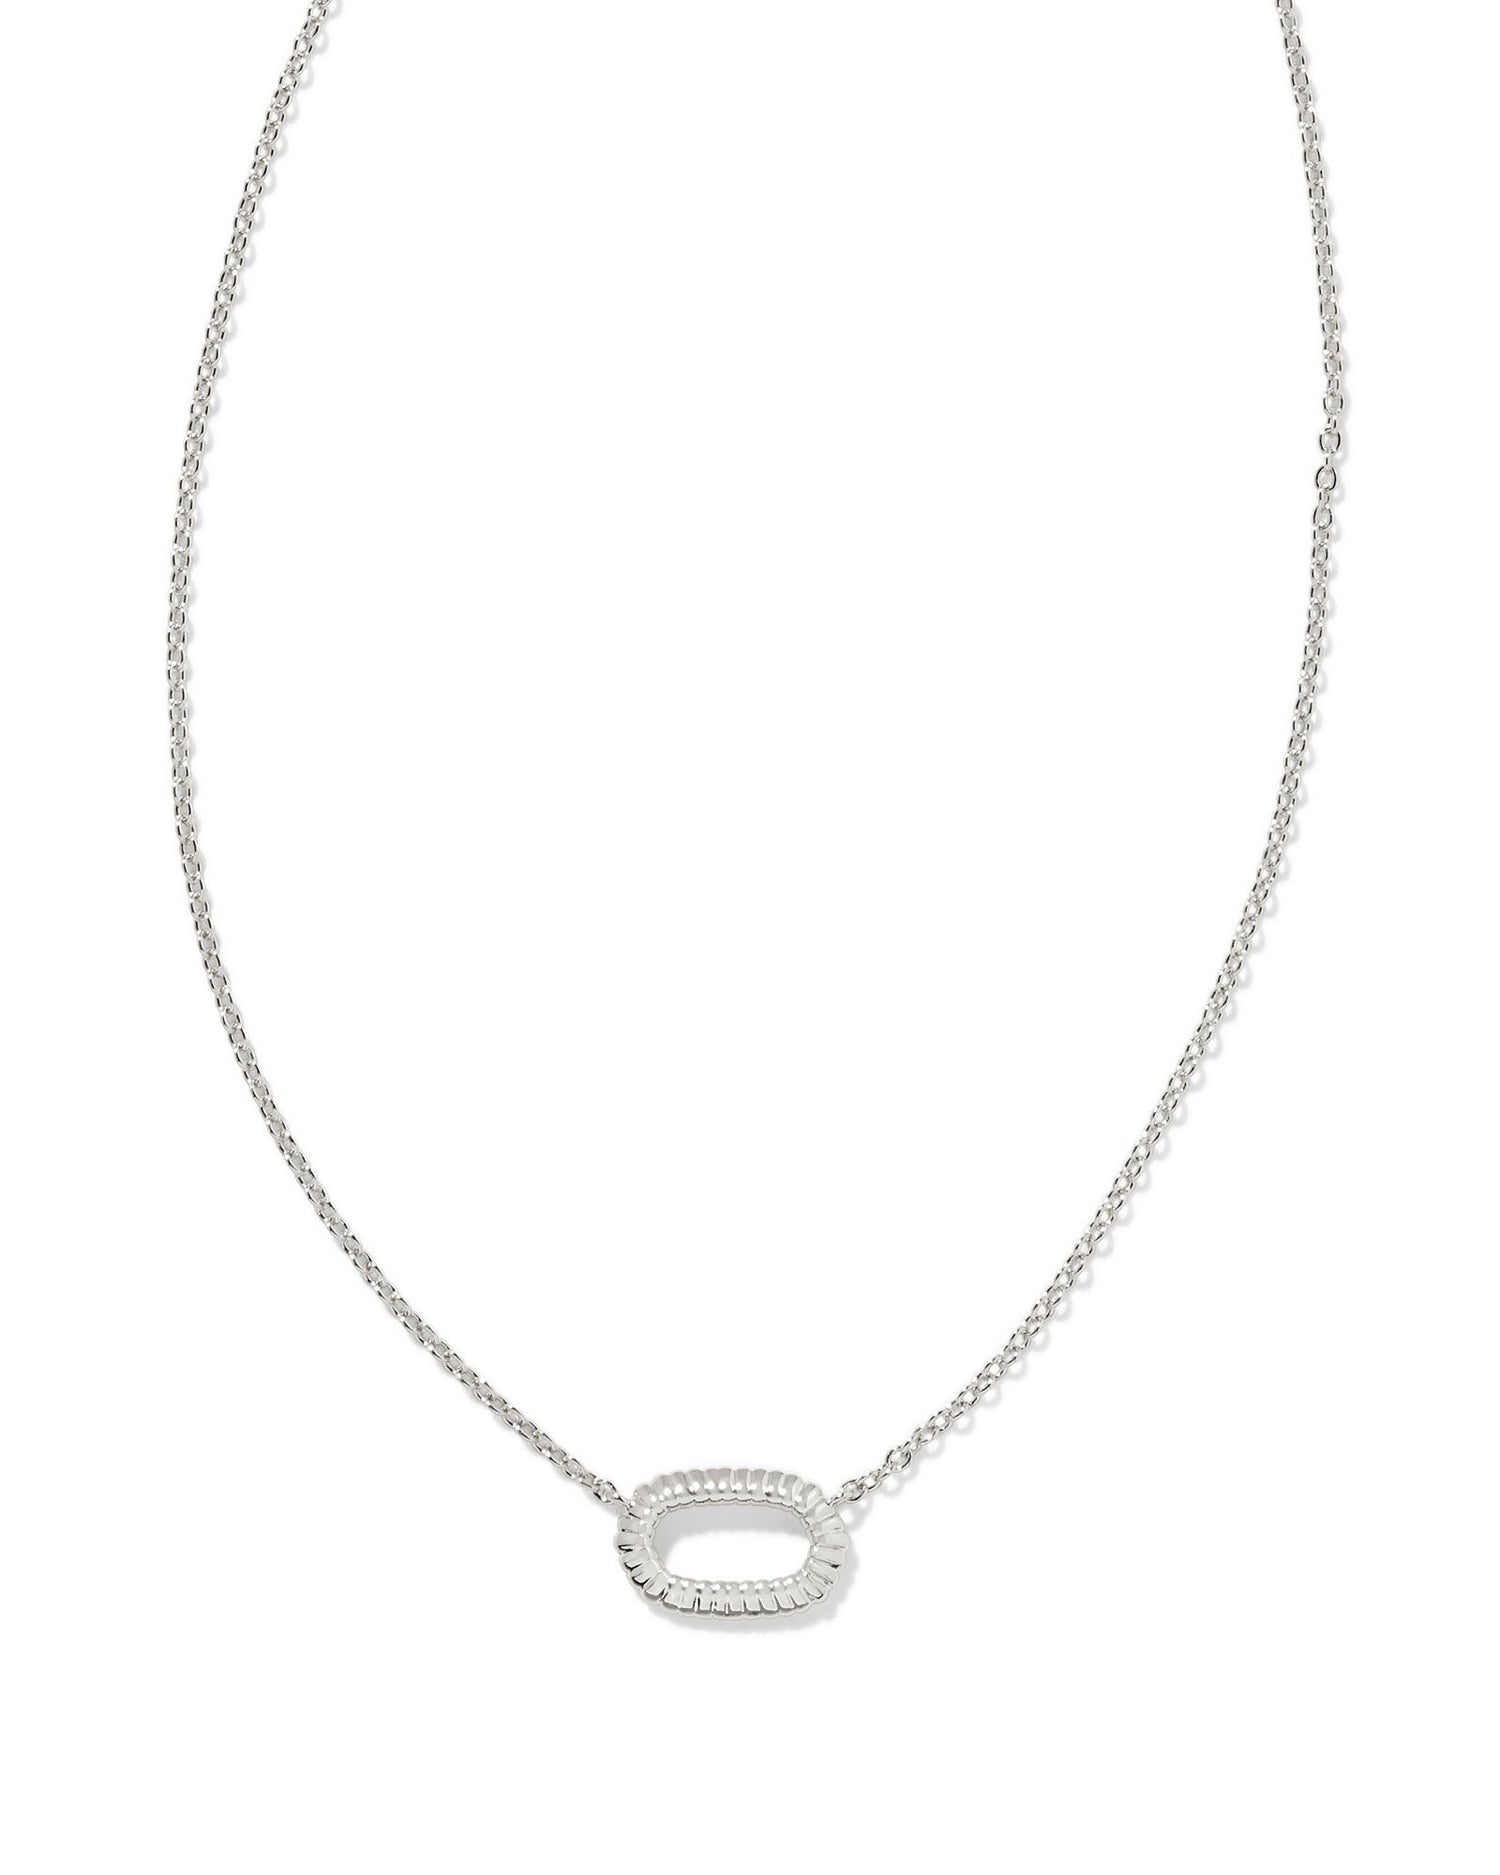 rhodium necklace with an open frame ridged pendant 